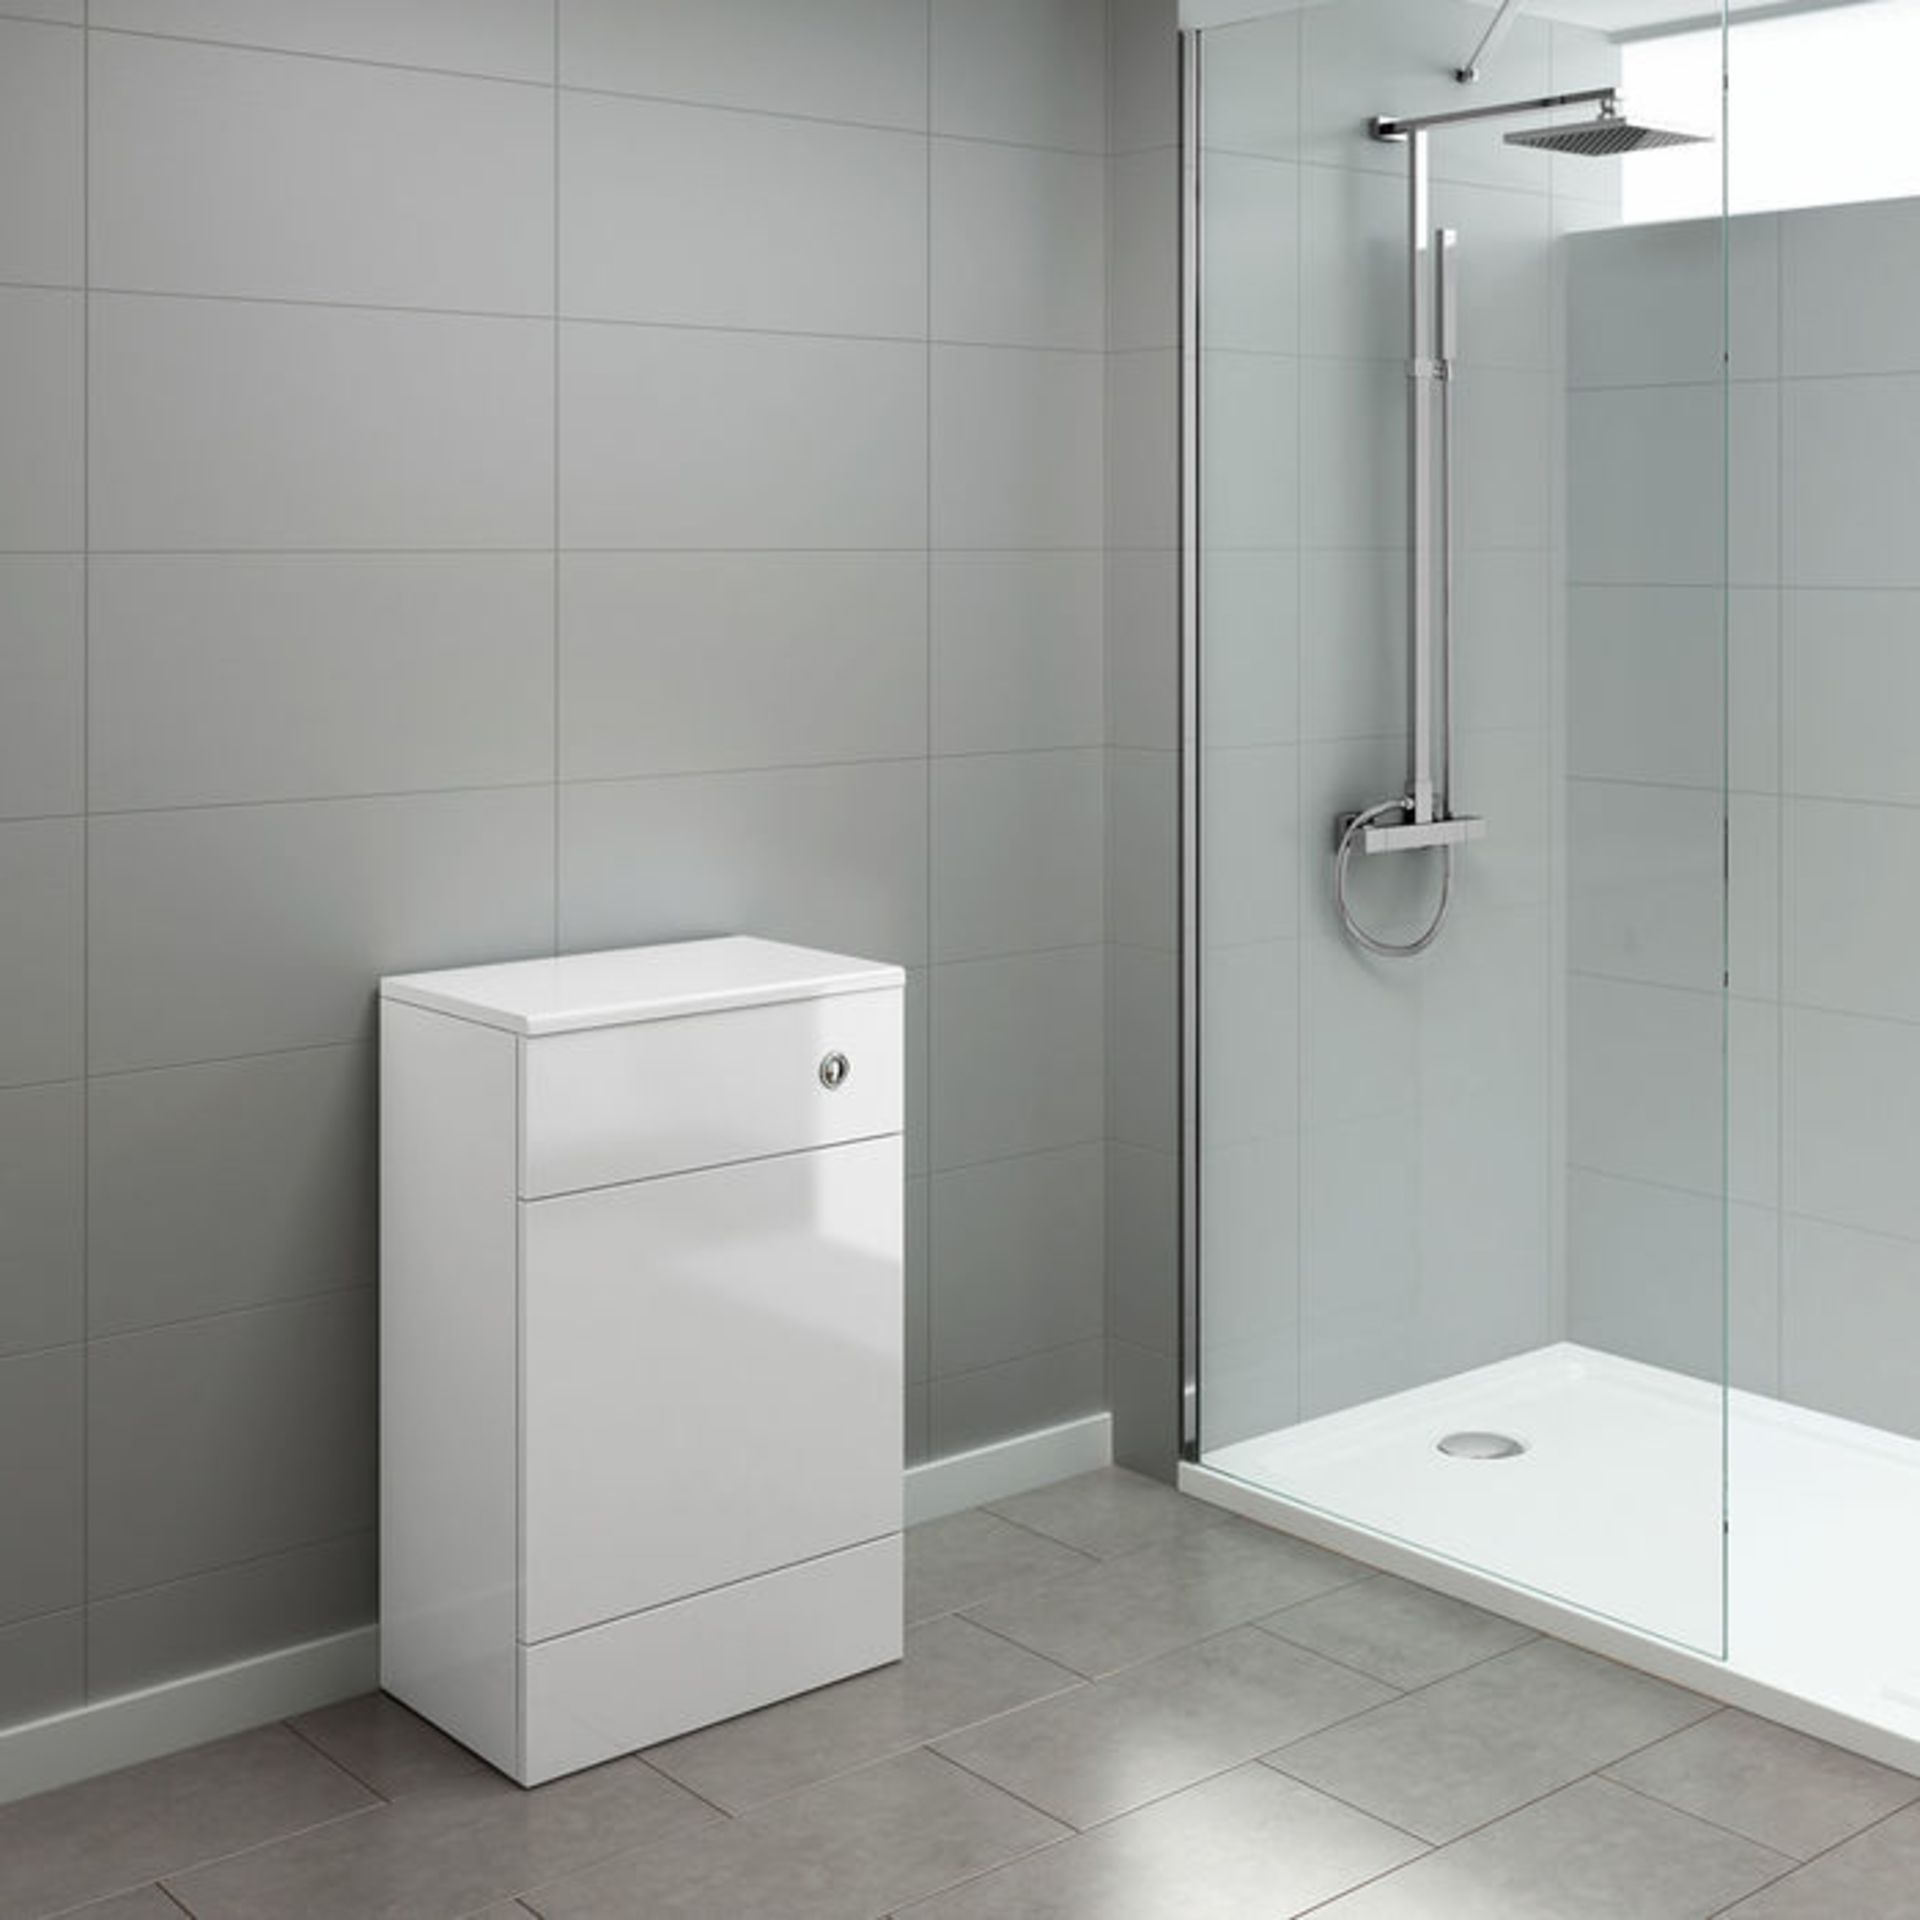 (TS97) 500mm Harper Gloss White Back To Wall Toilet Unit. RRP £109.99. Our discreet unit cleverly - Image 2 of 4